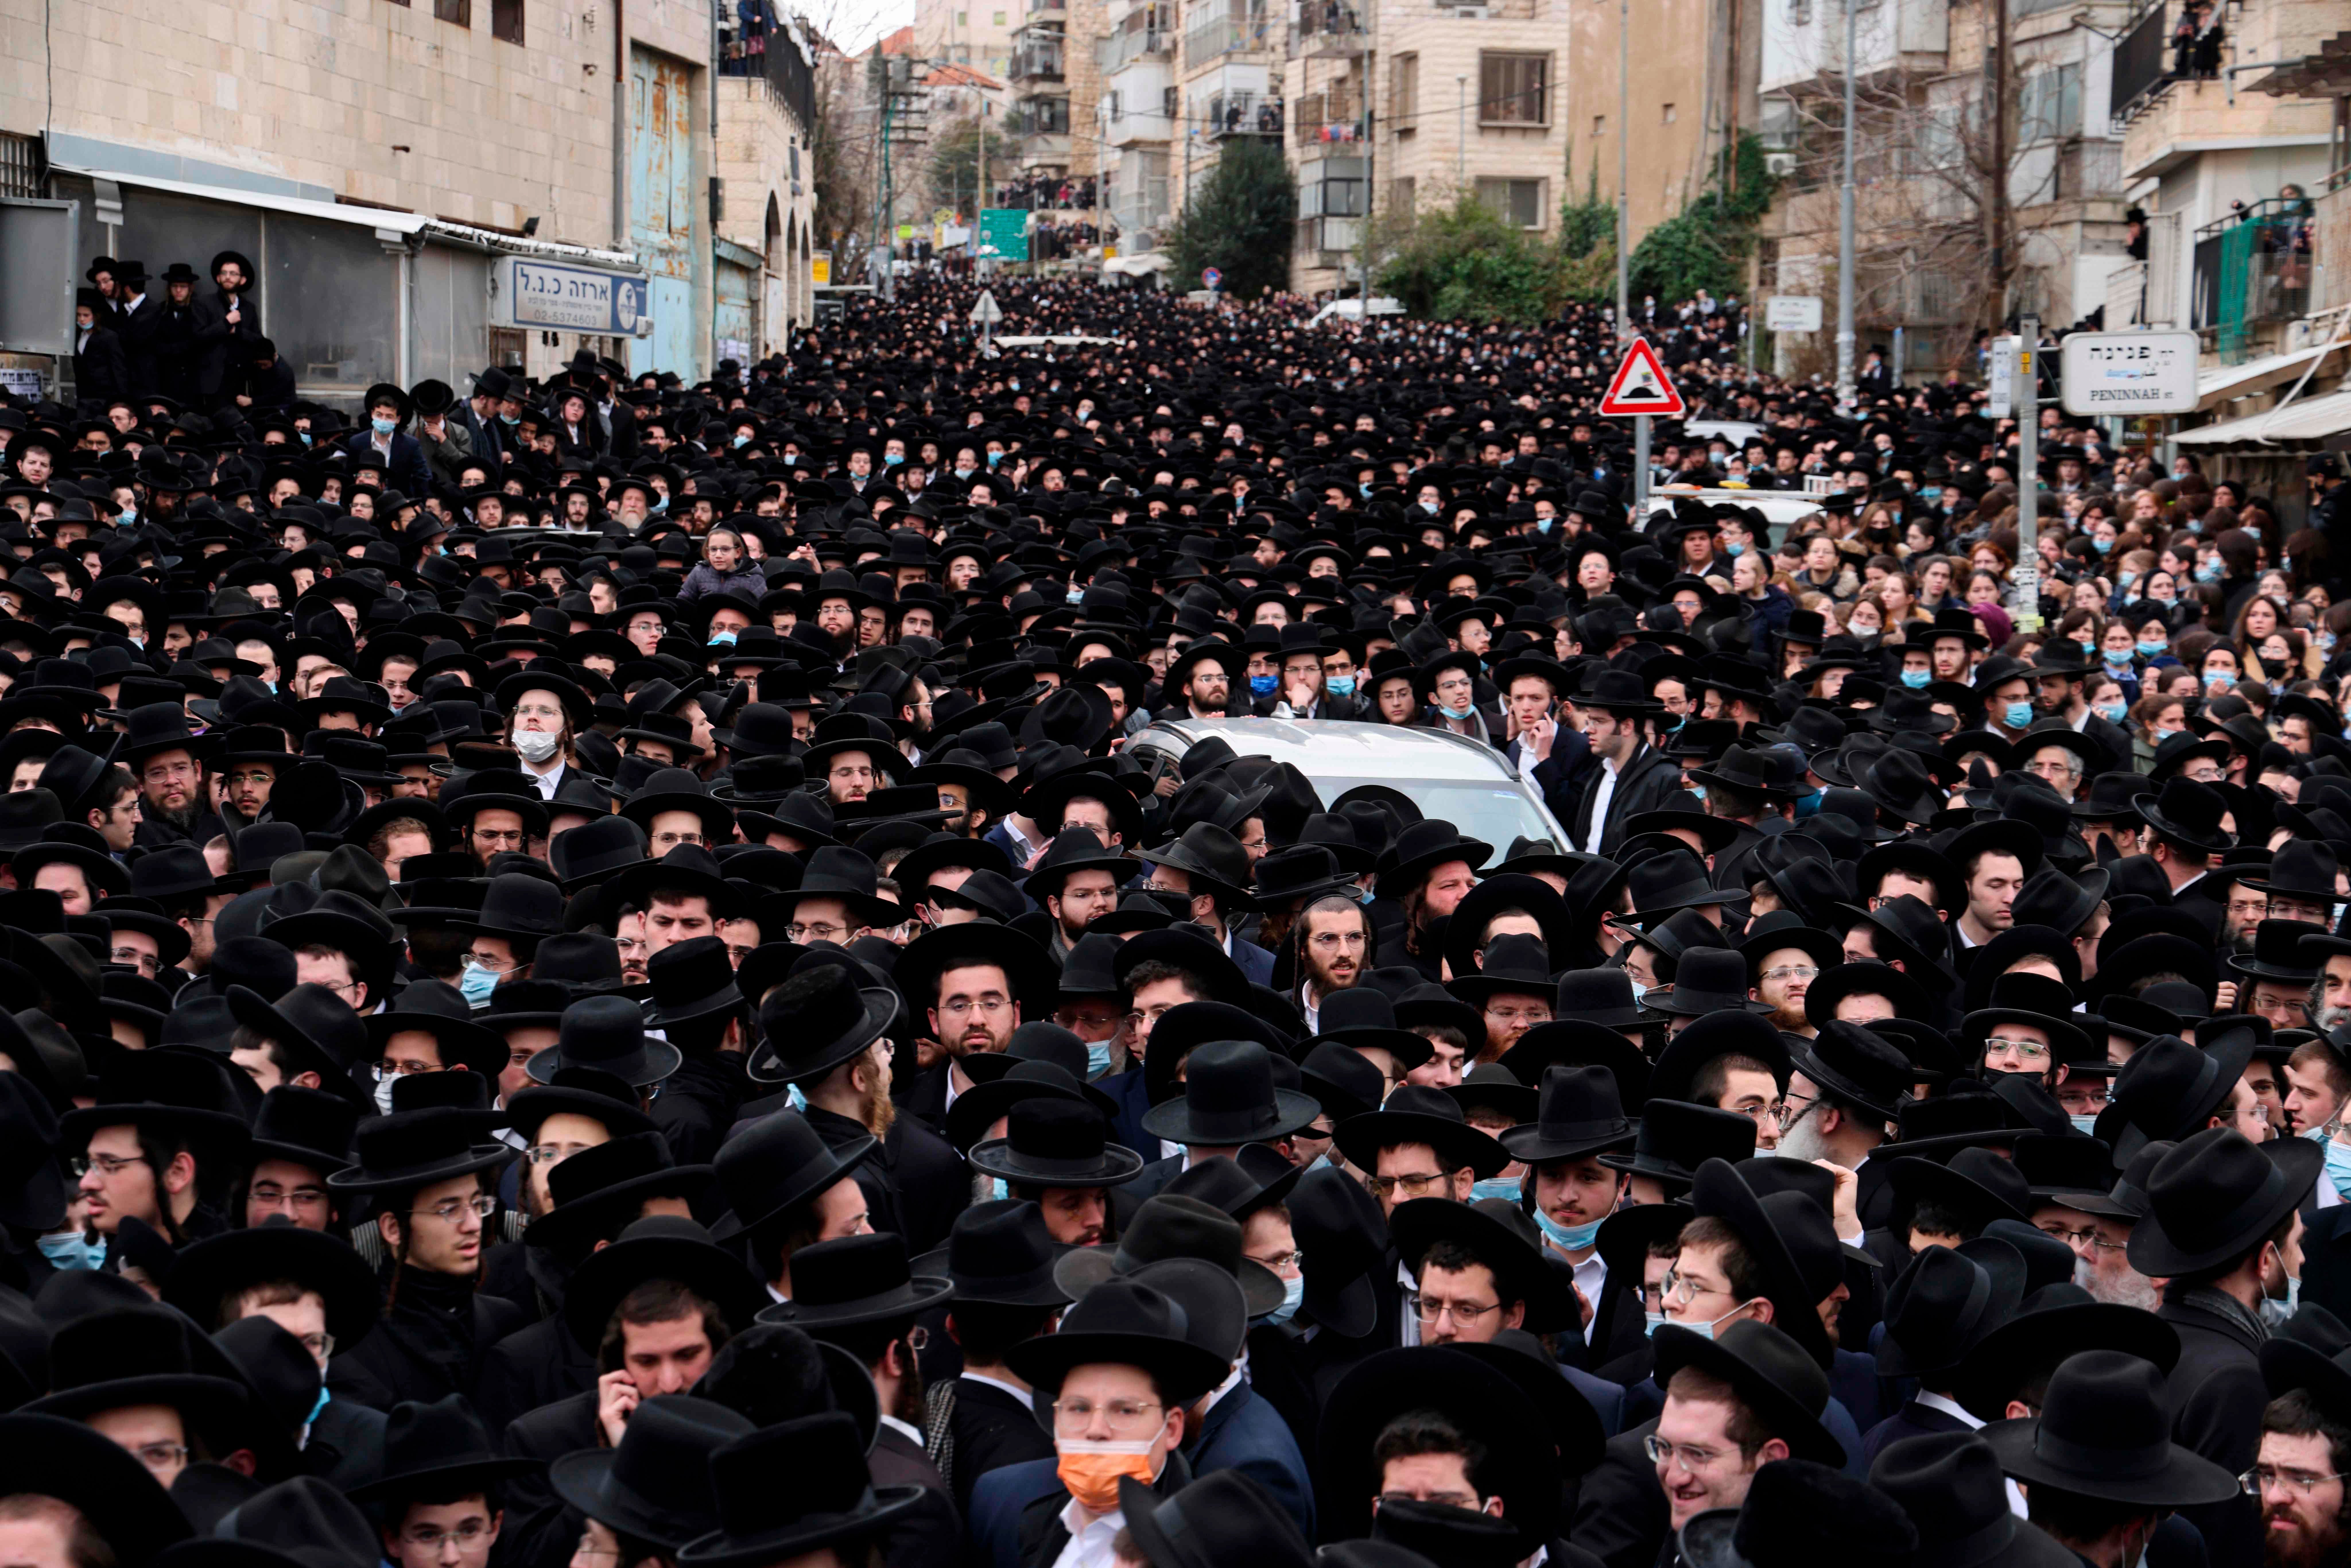 Thousands of Ultra-Orthodox Jews attend a funeral procession for the Head of the Brisk Yeshiva, Rabbi Meshulam Dovid Soloveitchik in Jerusalem